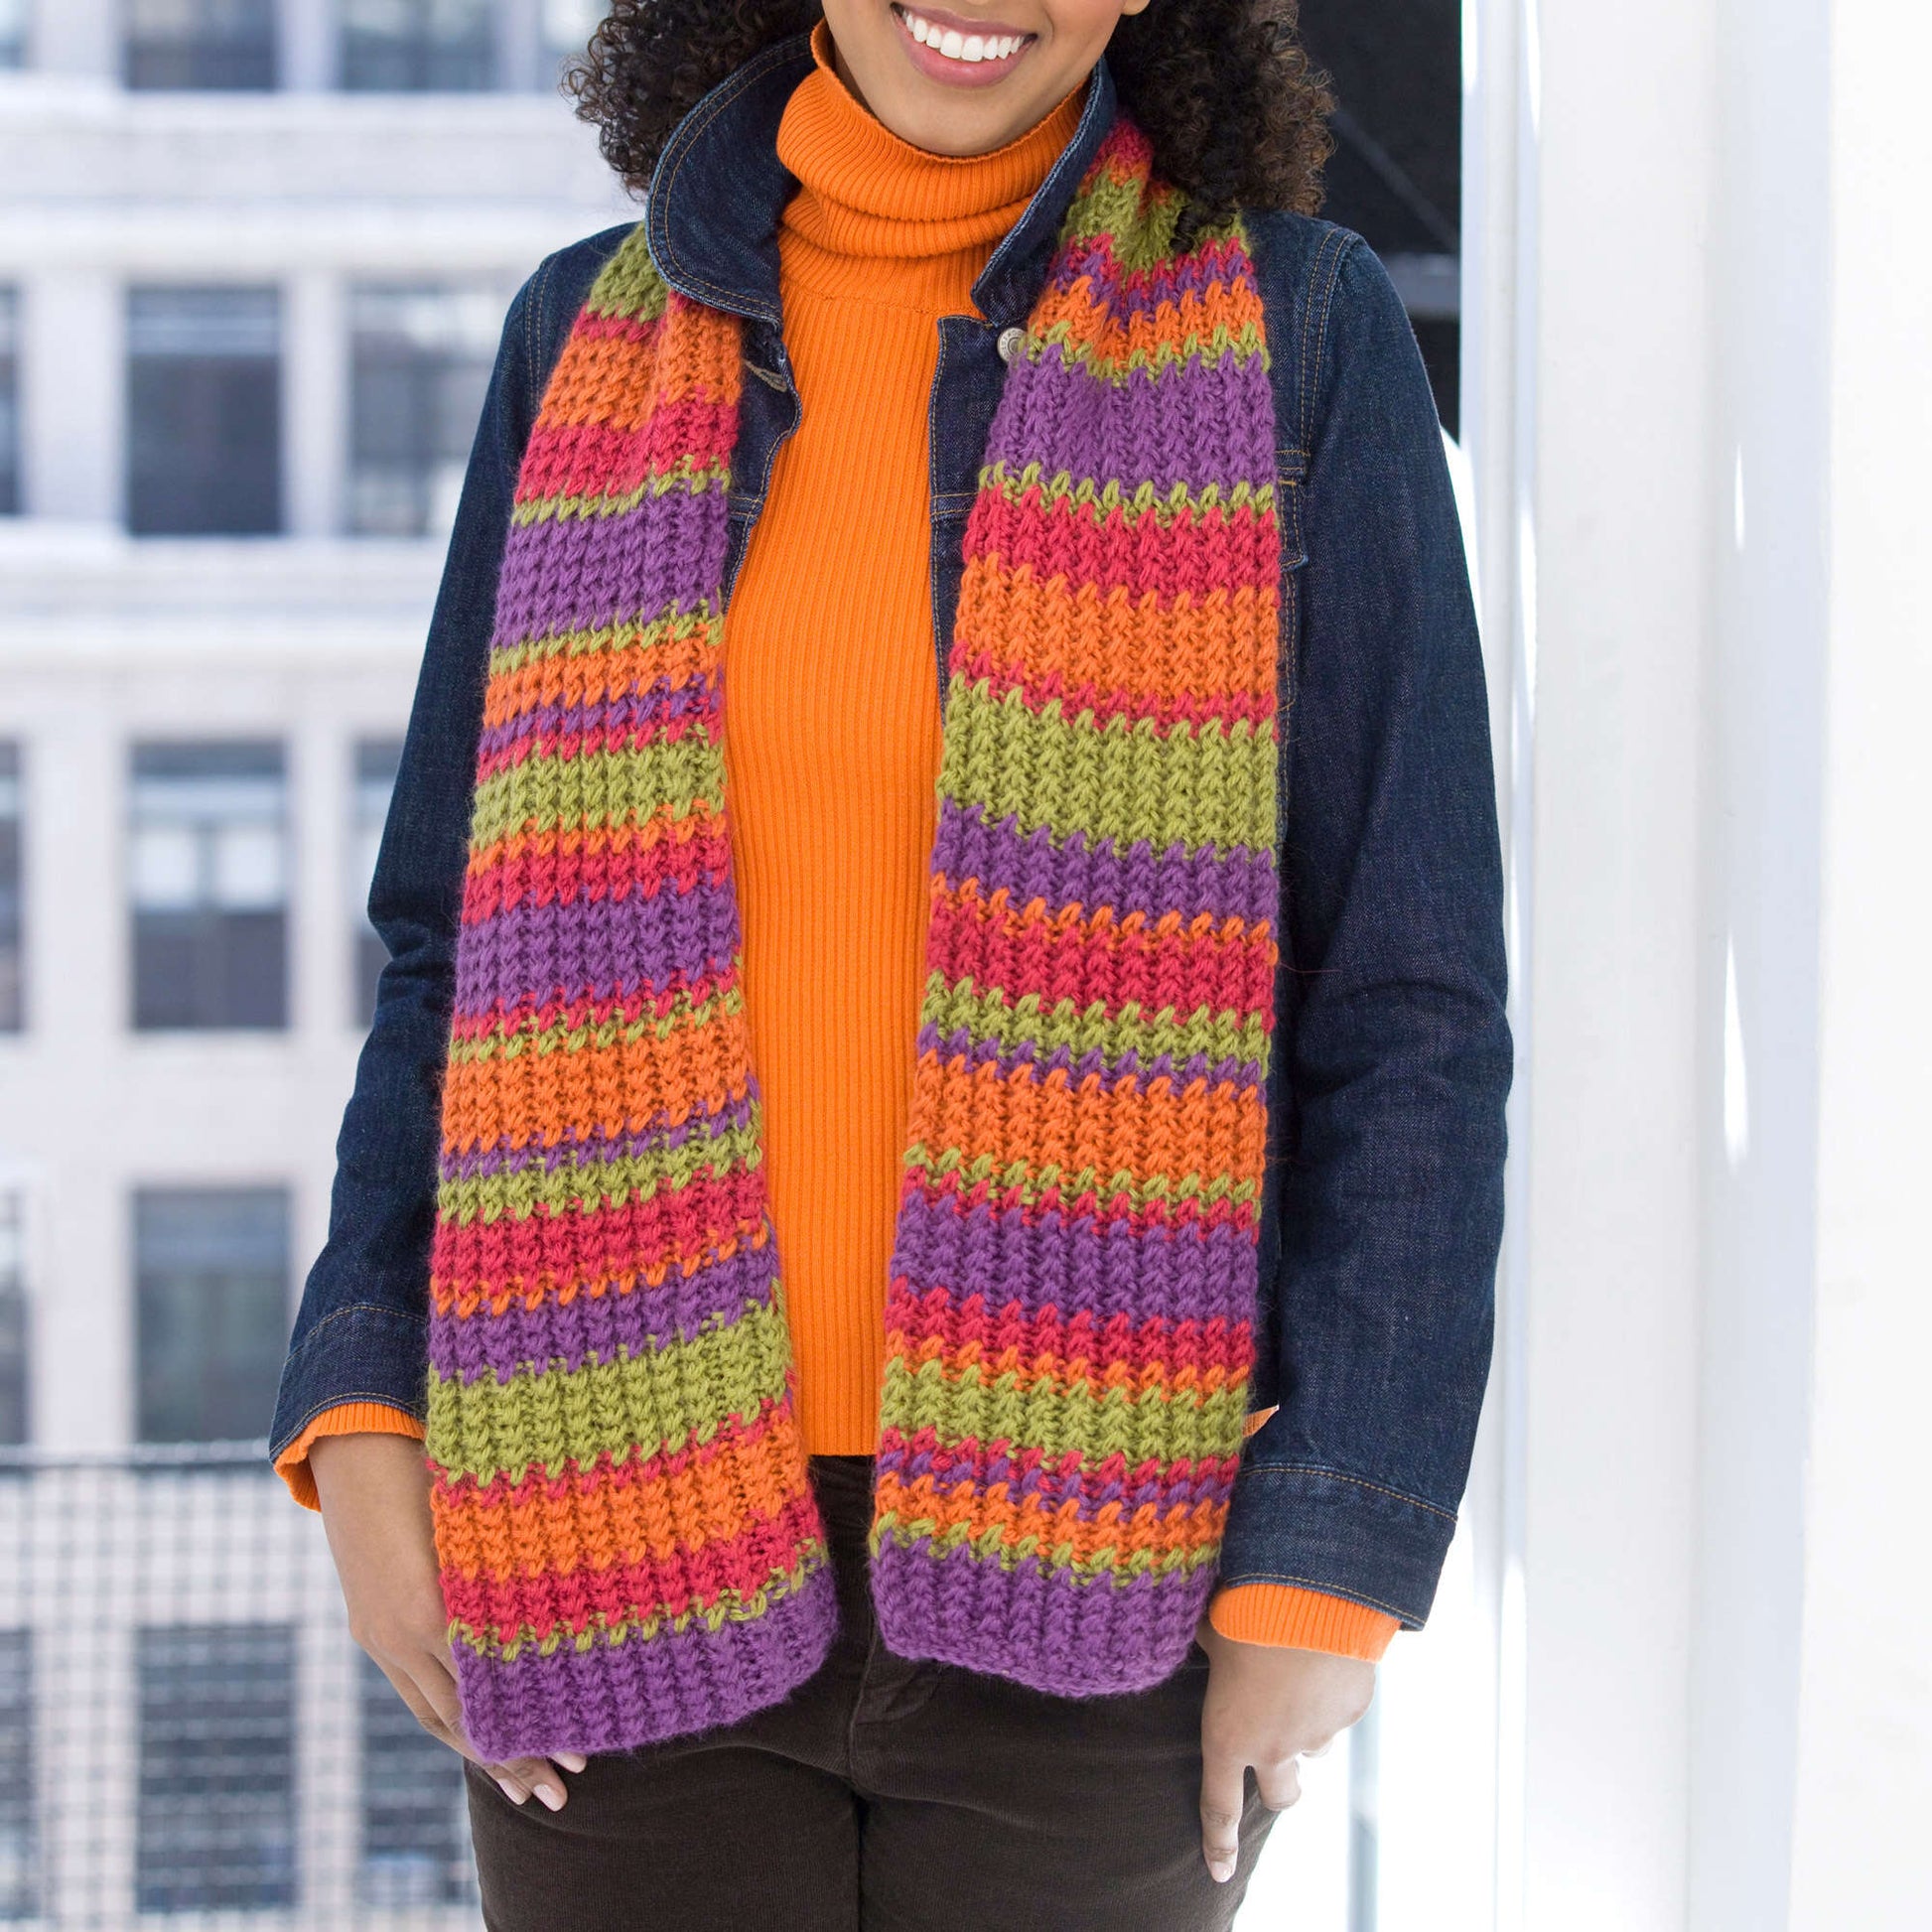 Free Red Heart Knit Reversible Cable Scarf Pattern